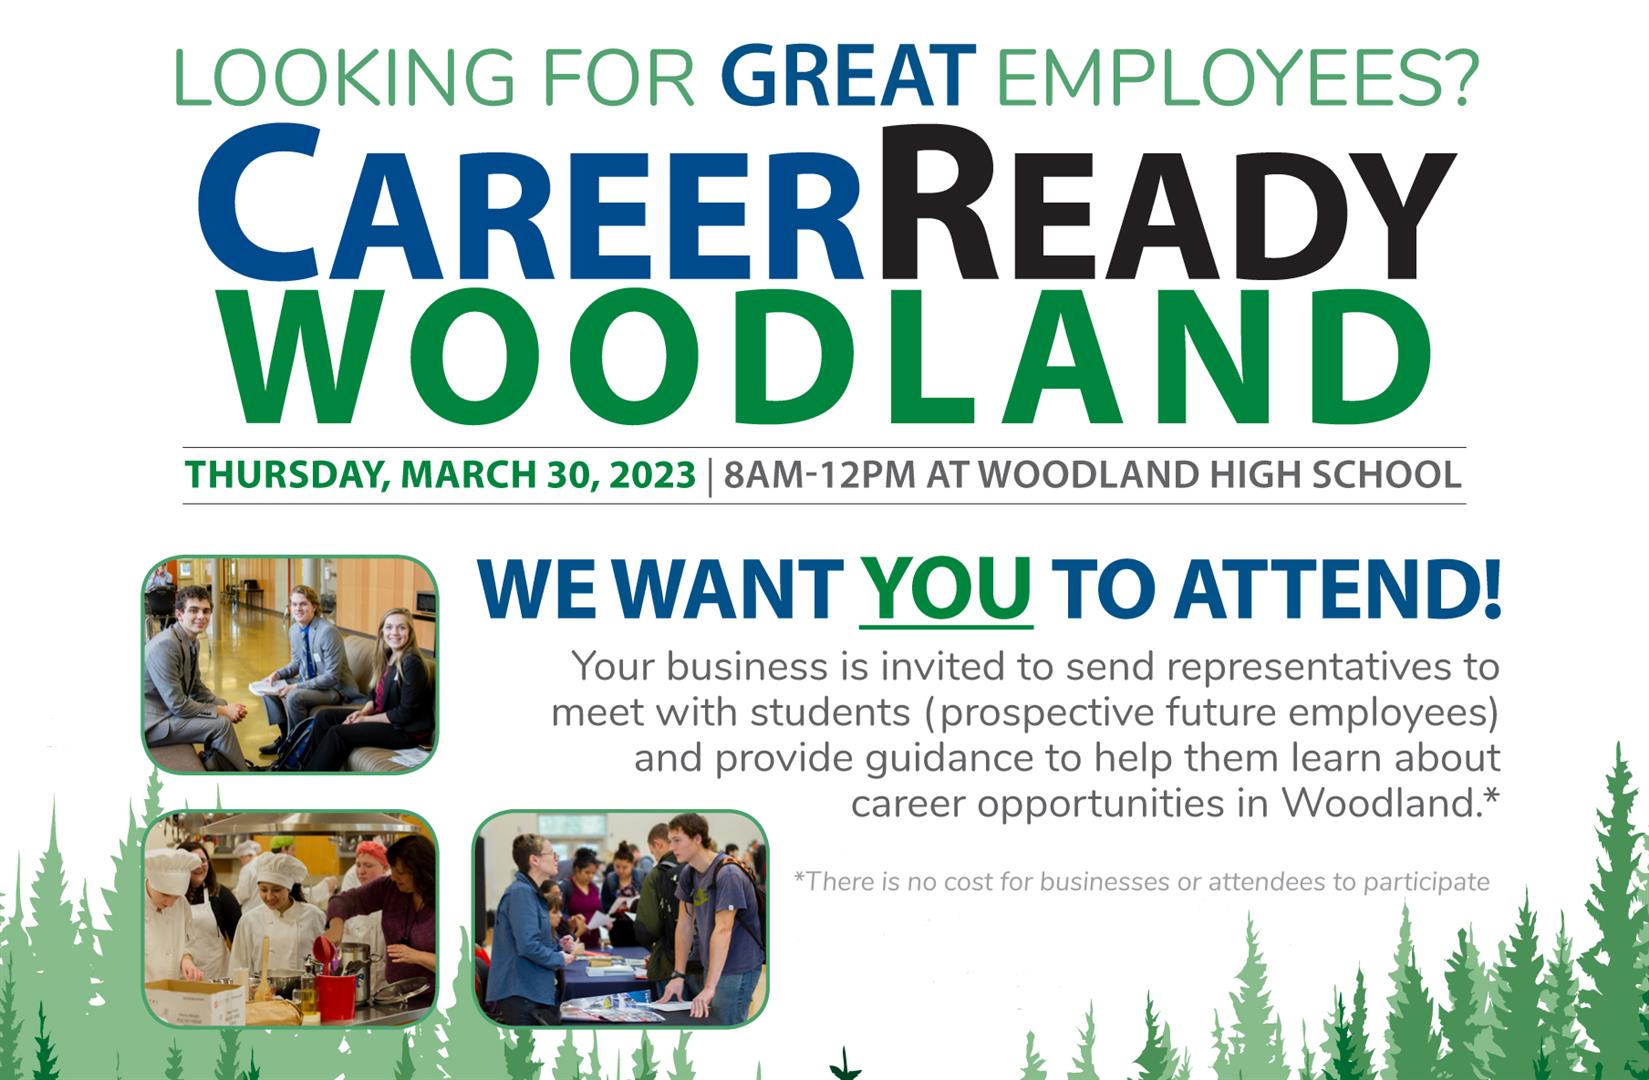 CareerReady Woodland is Thursday, March 30 from 8am-12pm and is free for businesses to attend